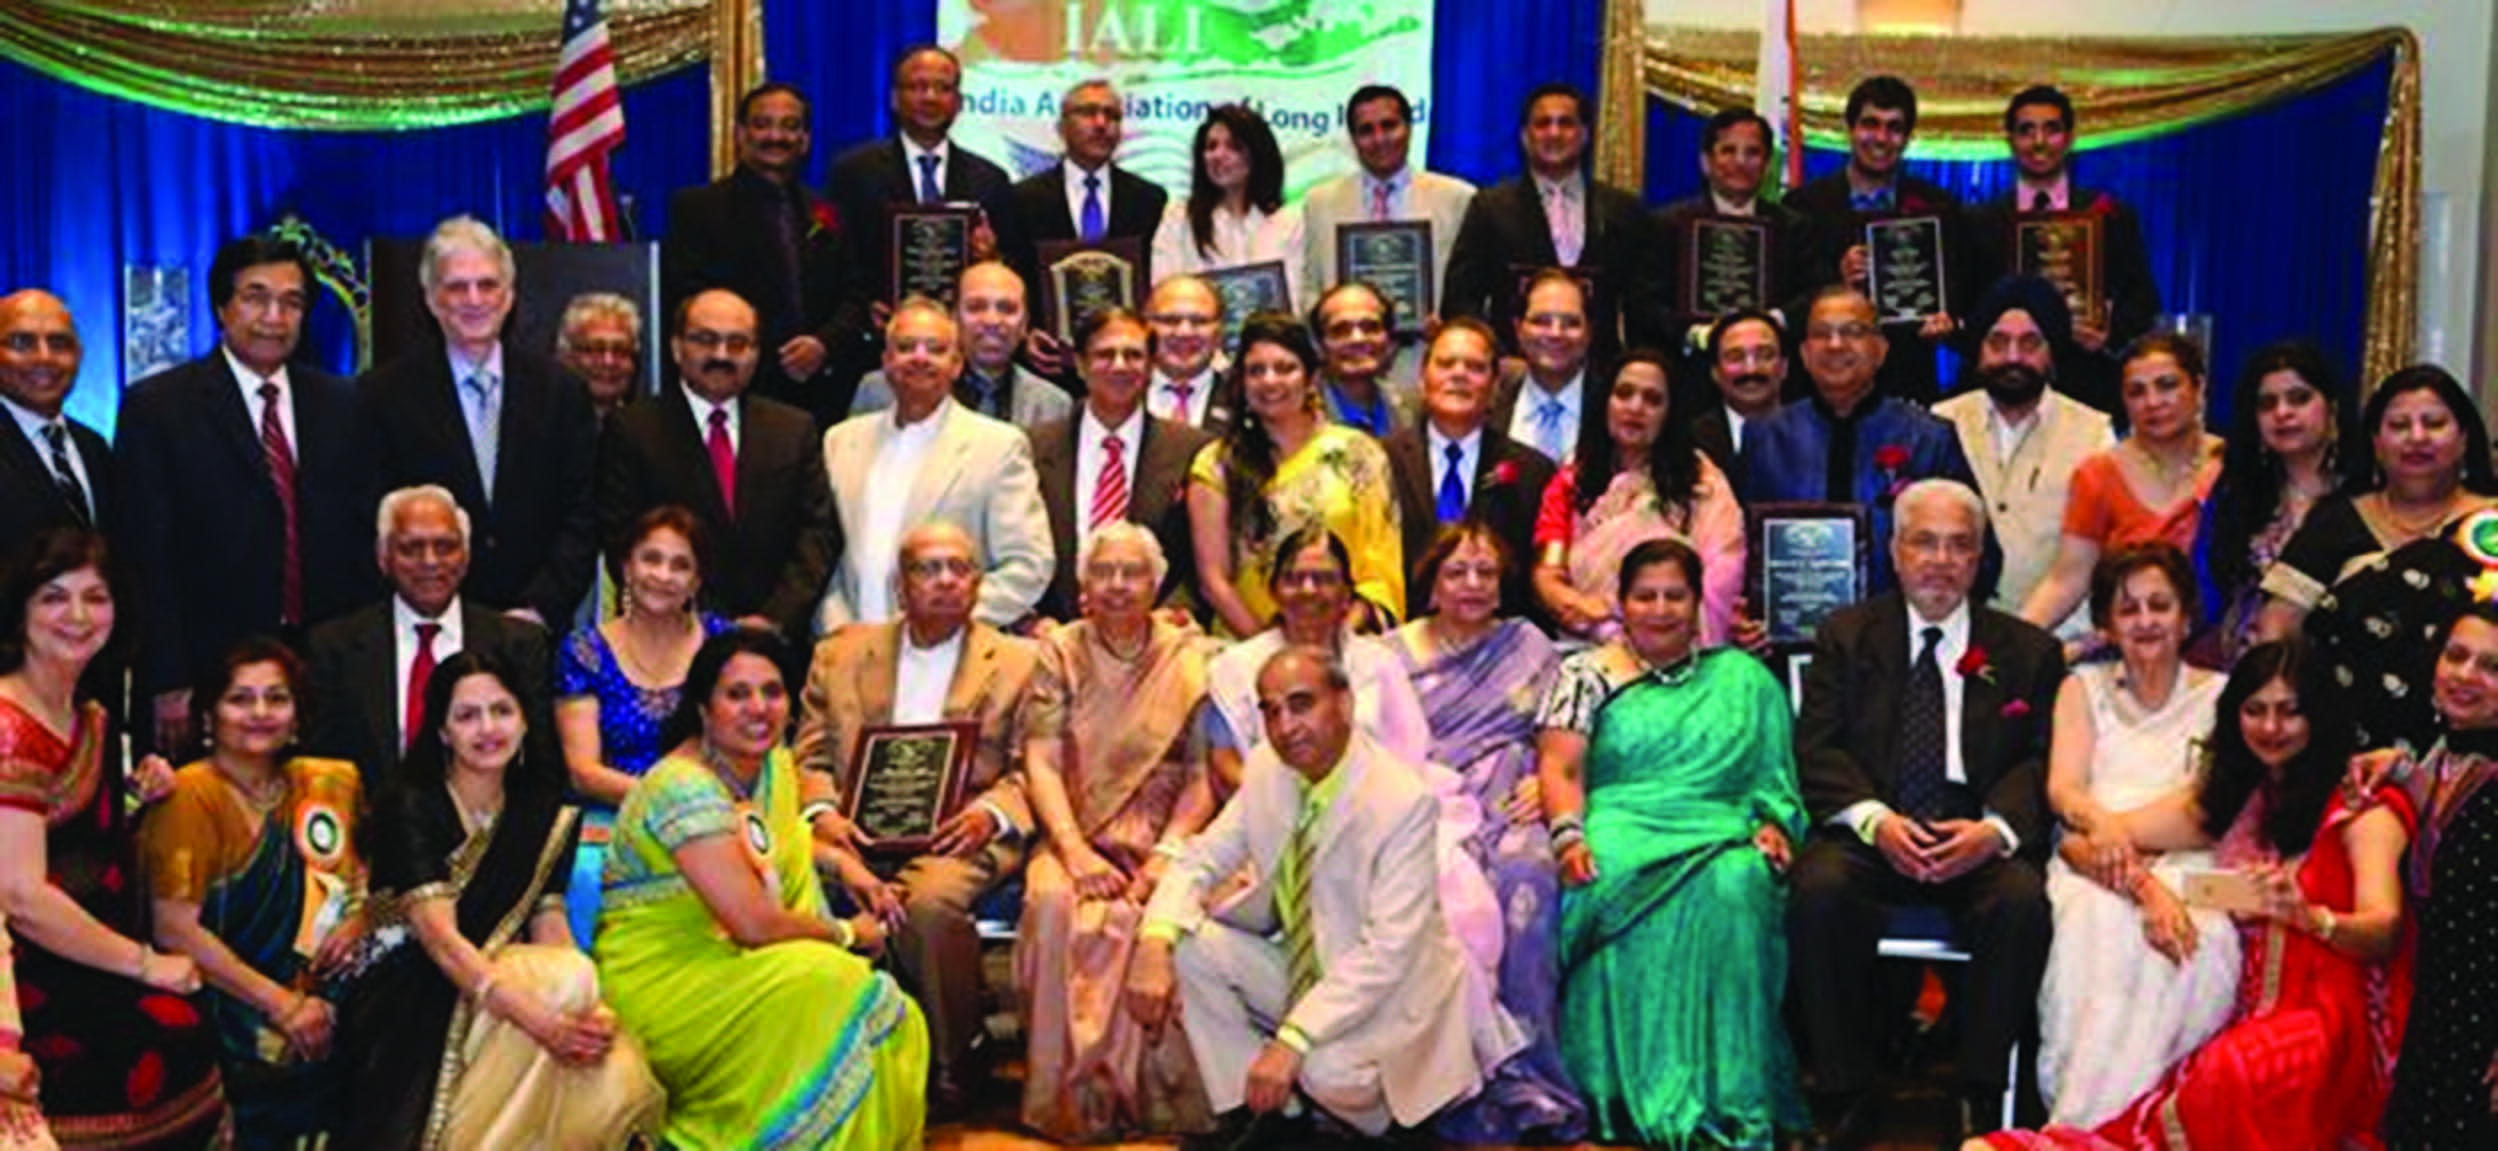 The organizers and the honorees of India Association of long Island - IALI